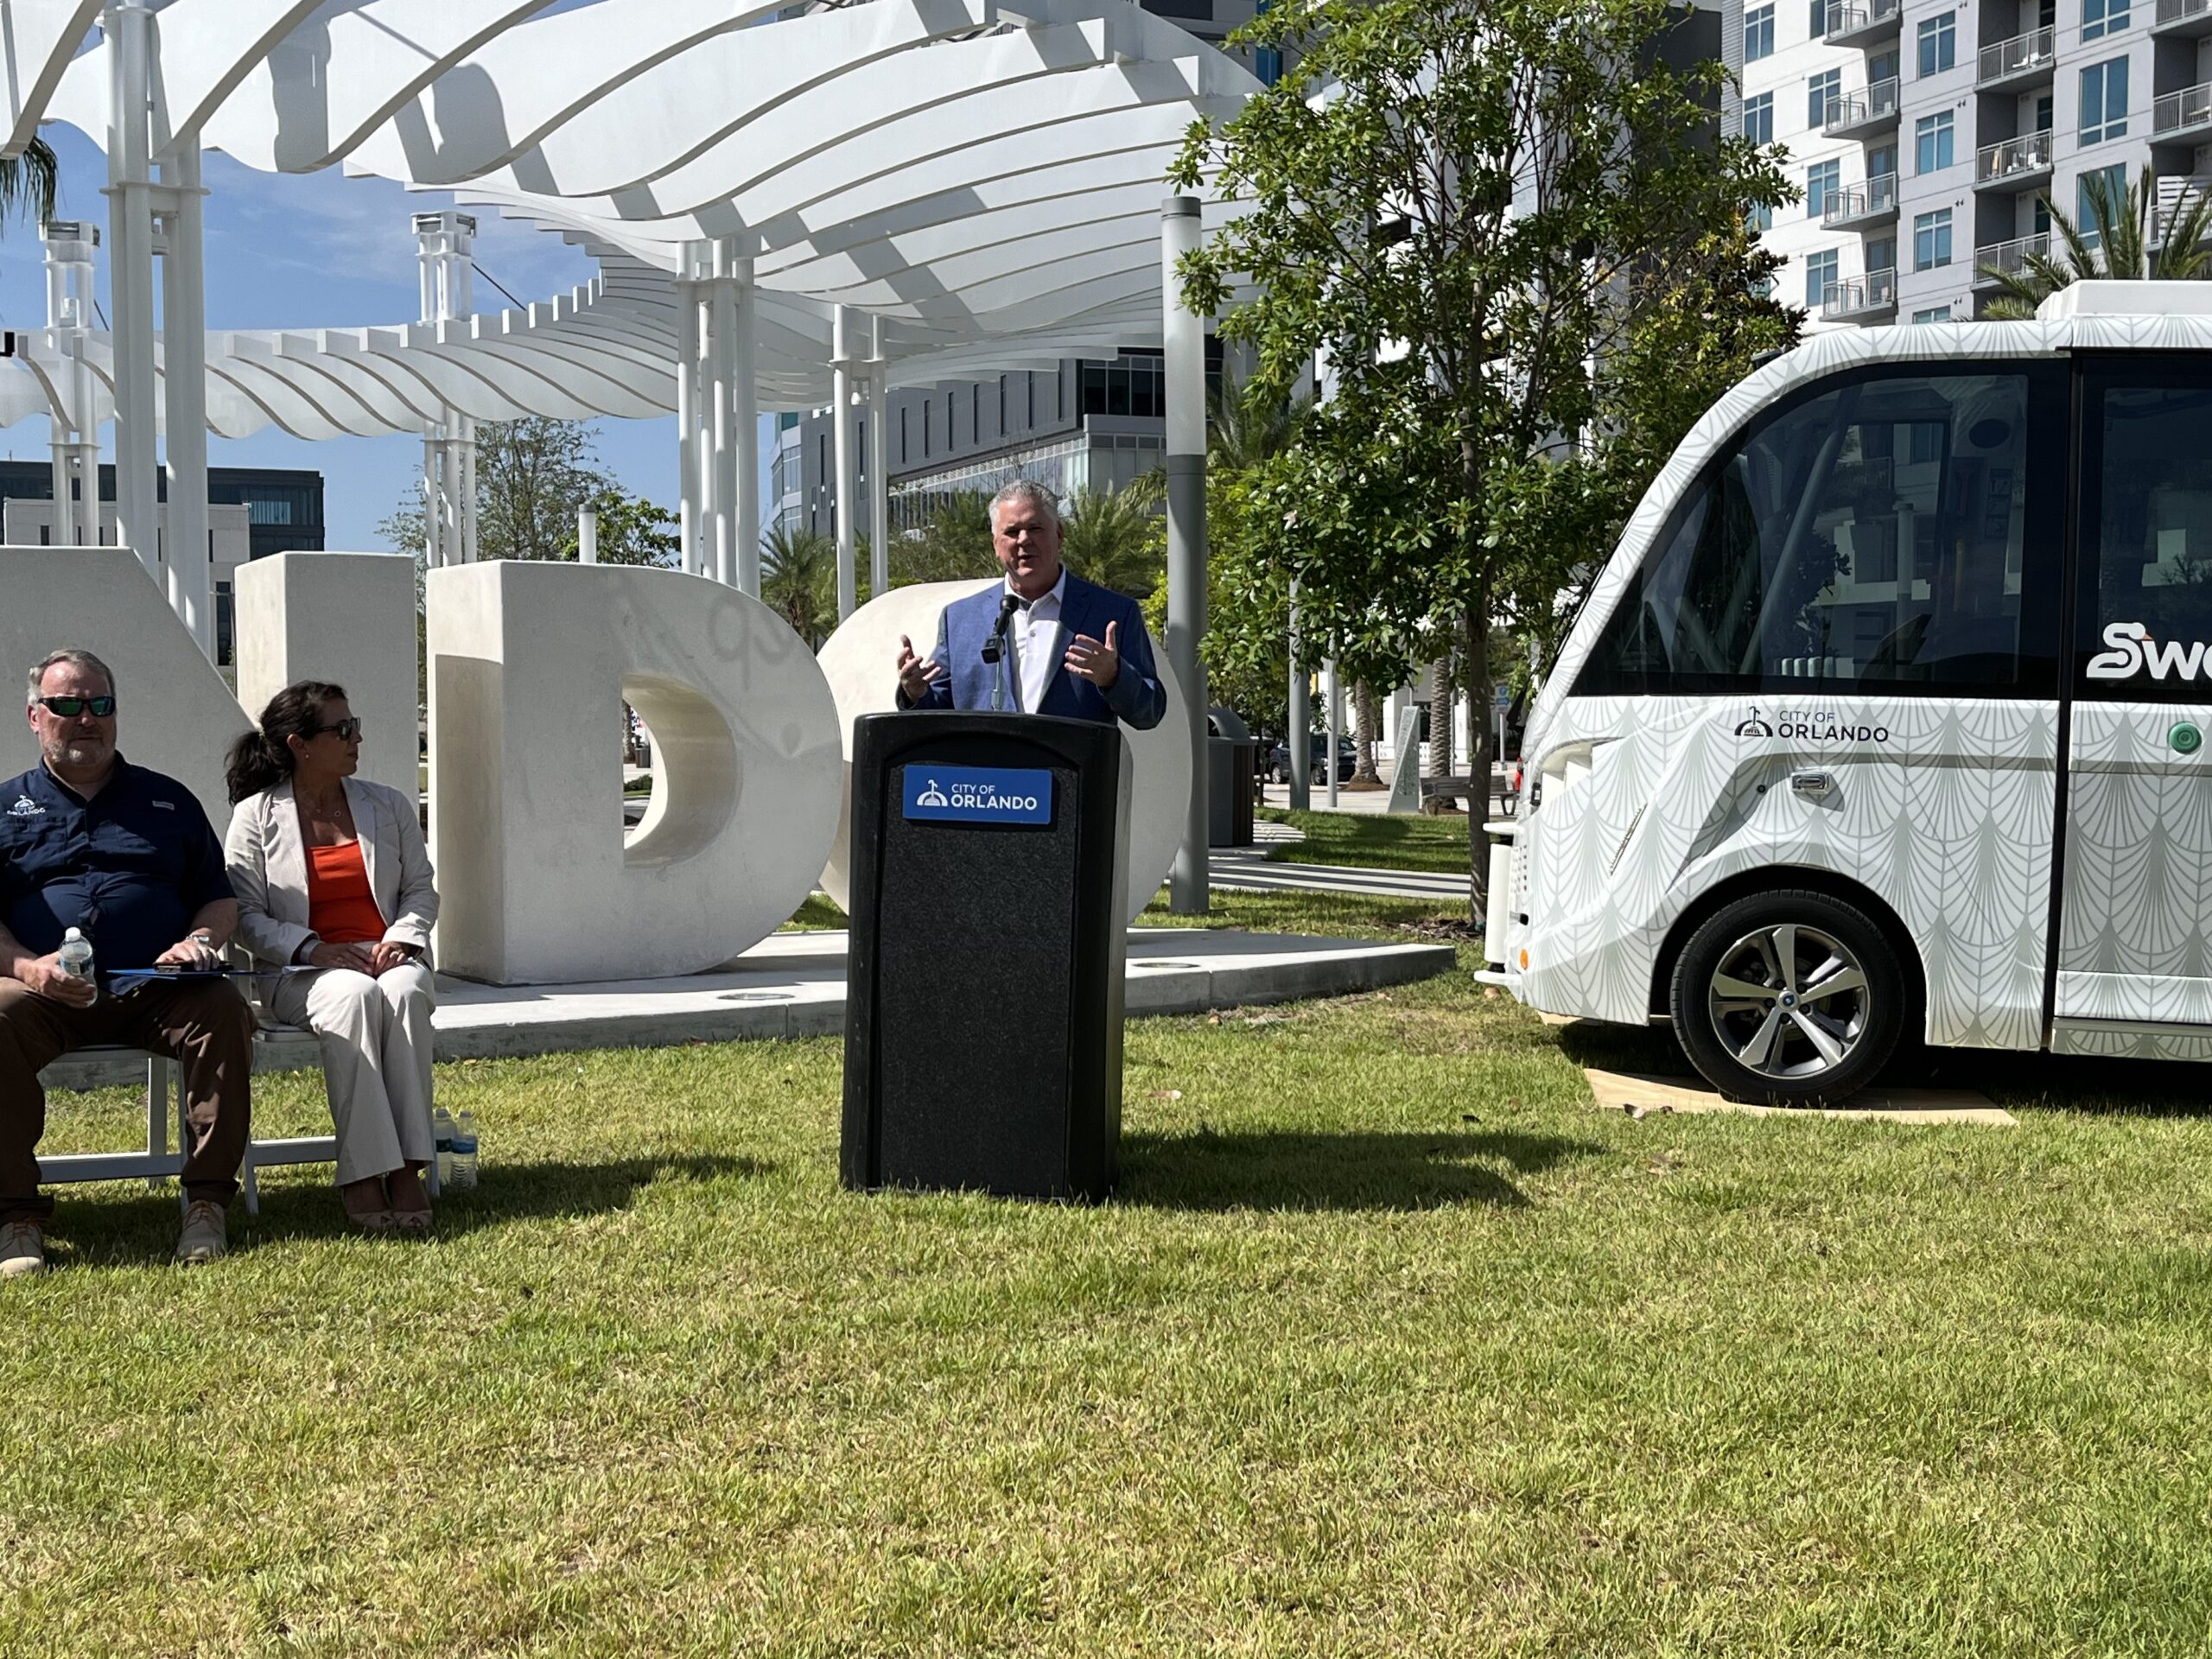 The SWAN Shuttle pilot will launch in Downtown Orlando’s Creative Village